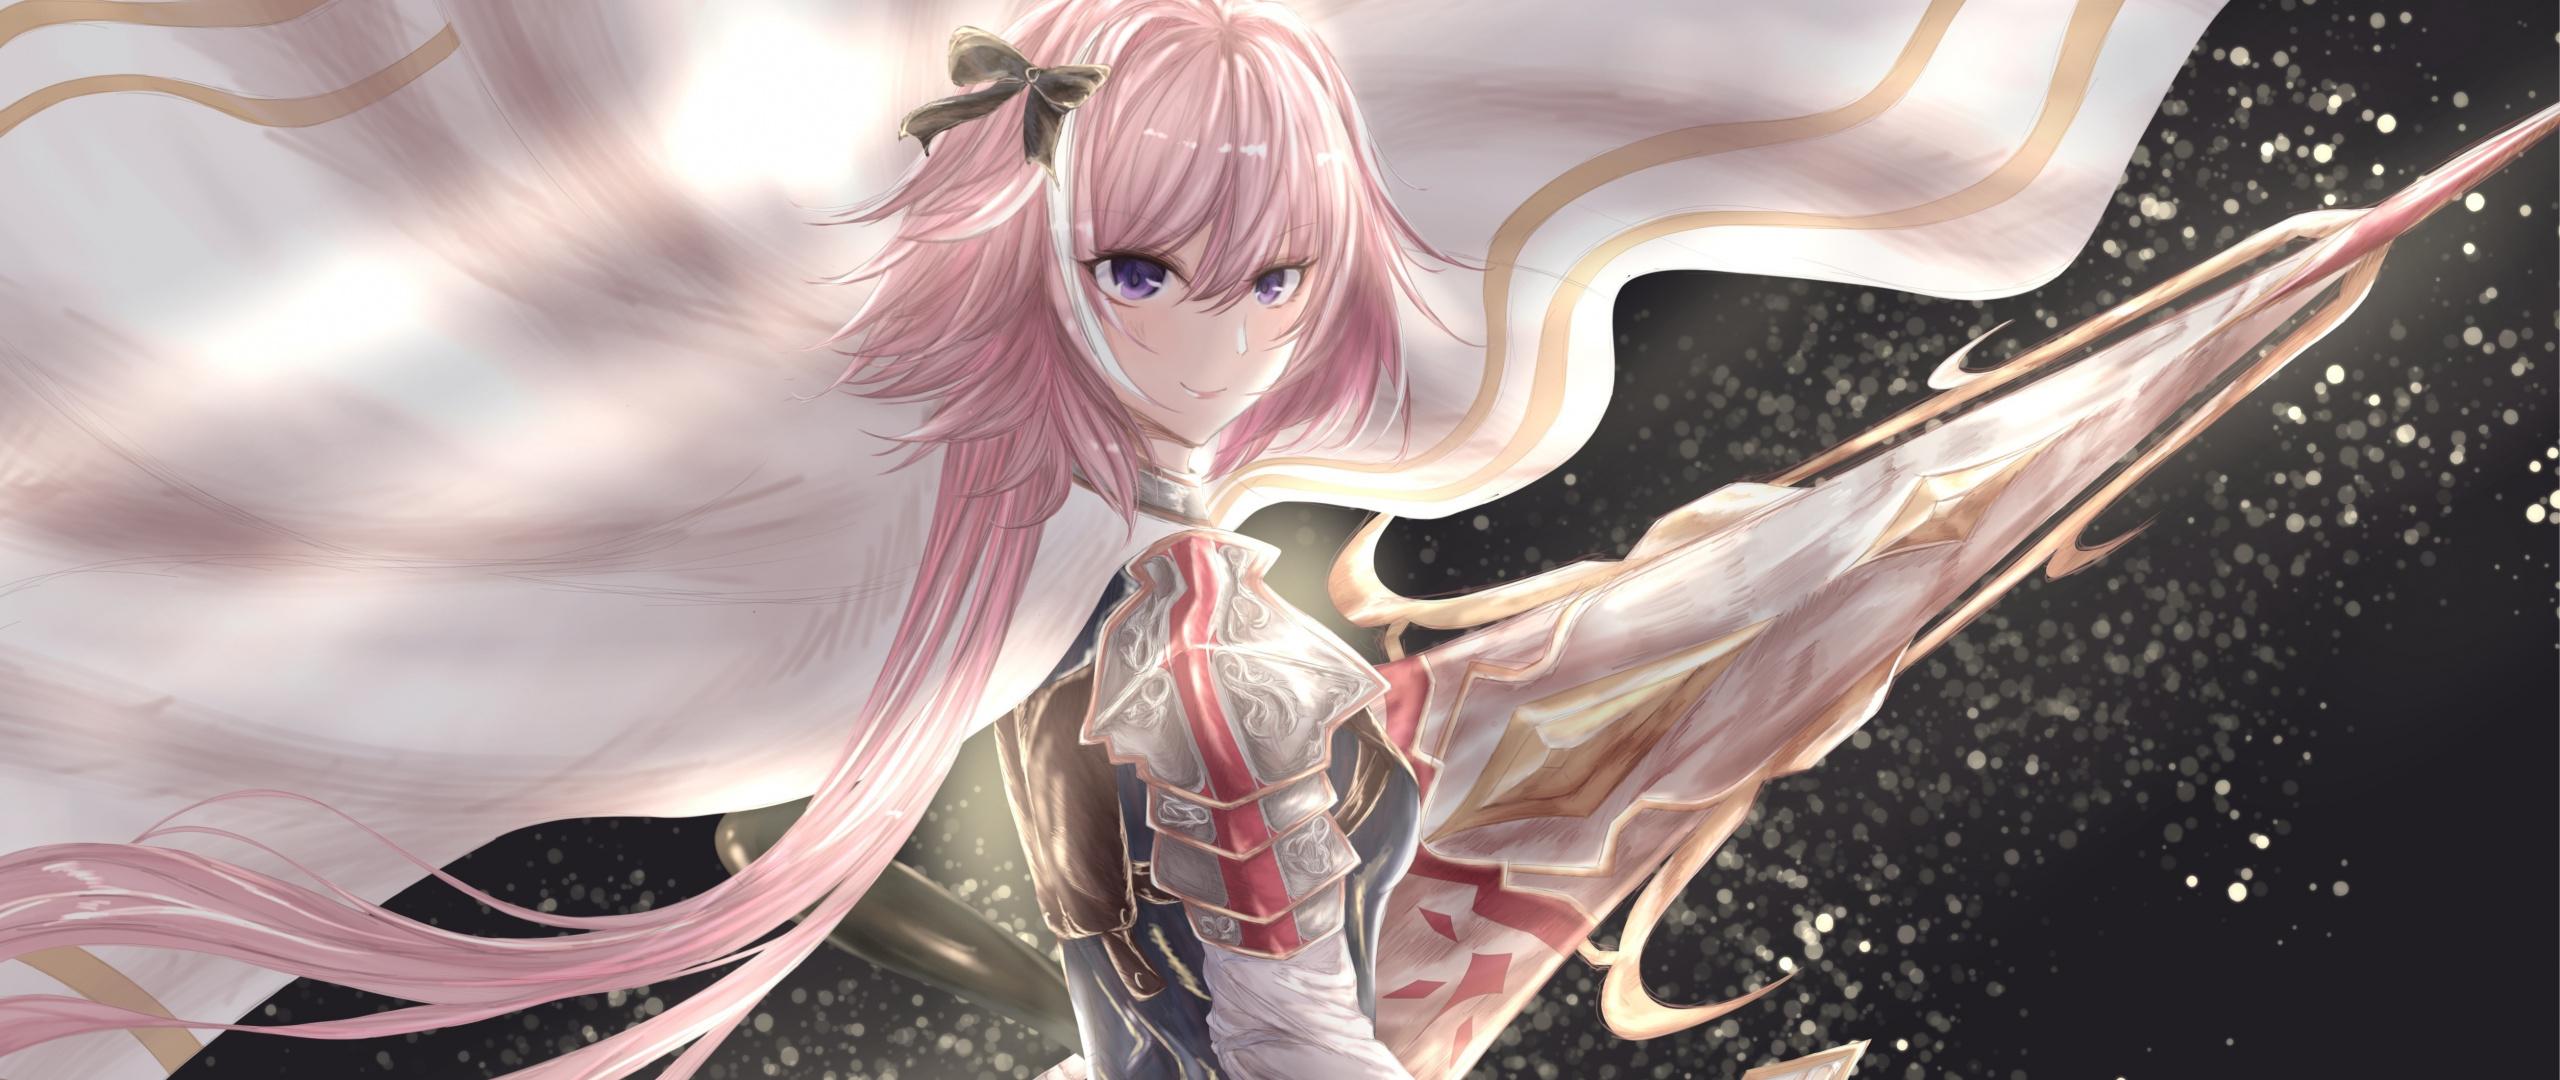 Update 54+ astolfo wallpapers latest - in.cdgdbentre